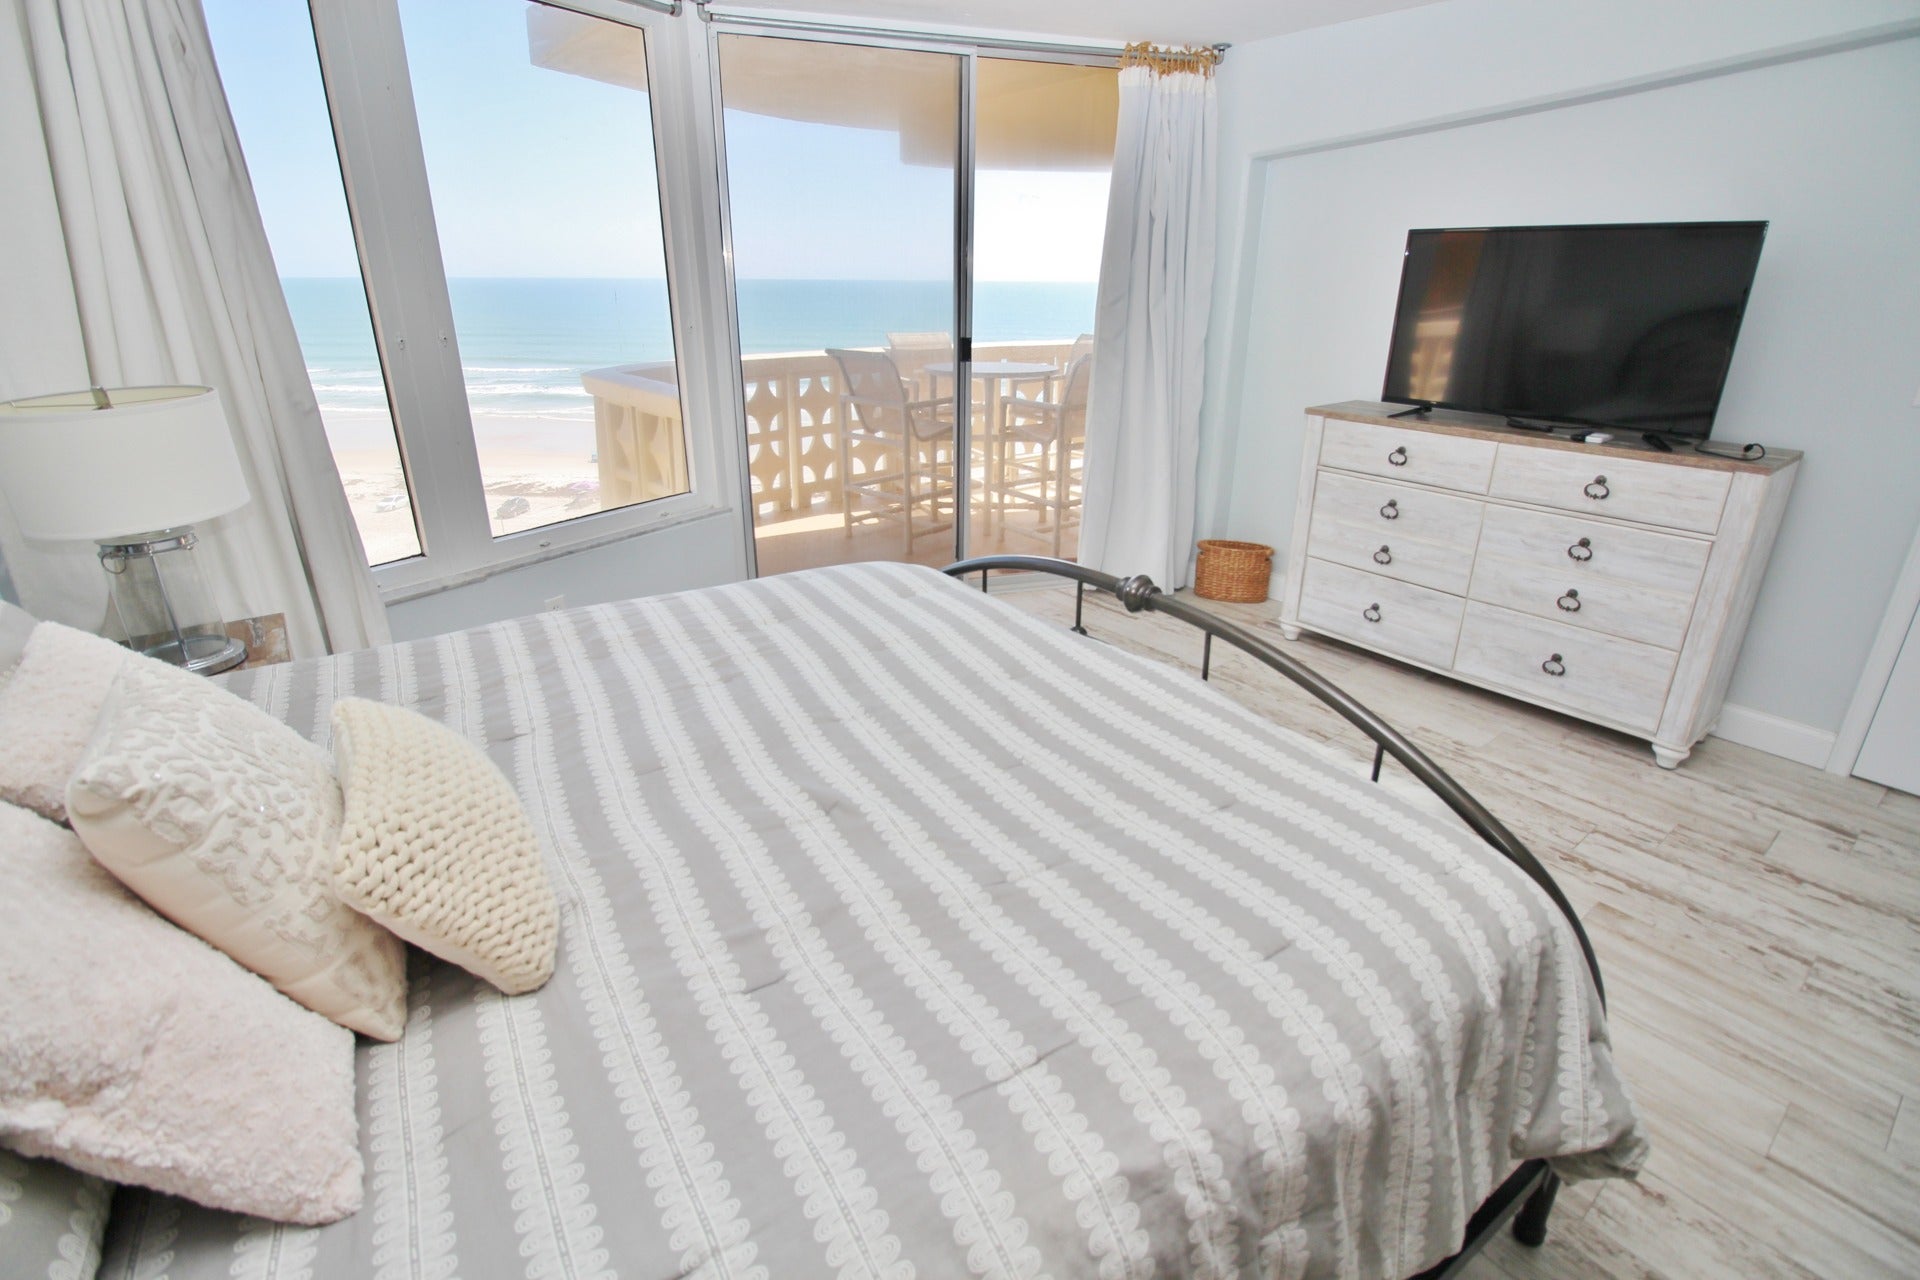 Fall asleep to ocean waves from the primary bedroom